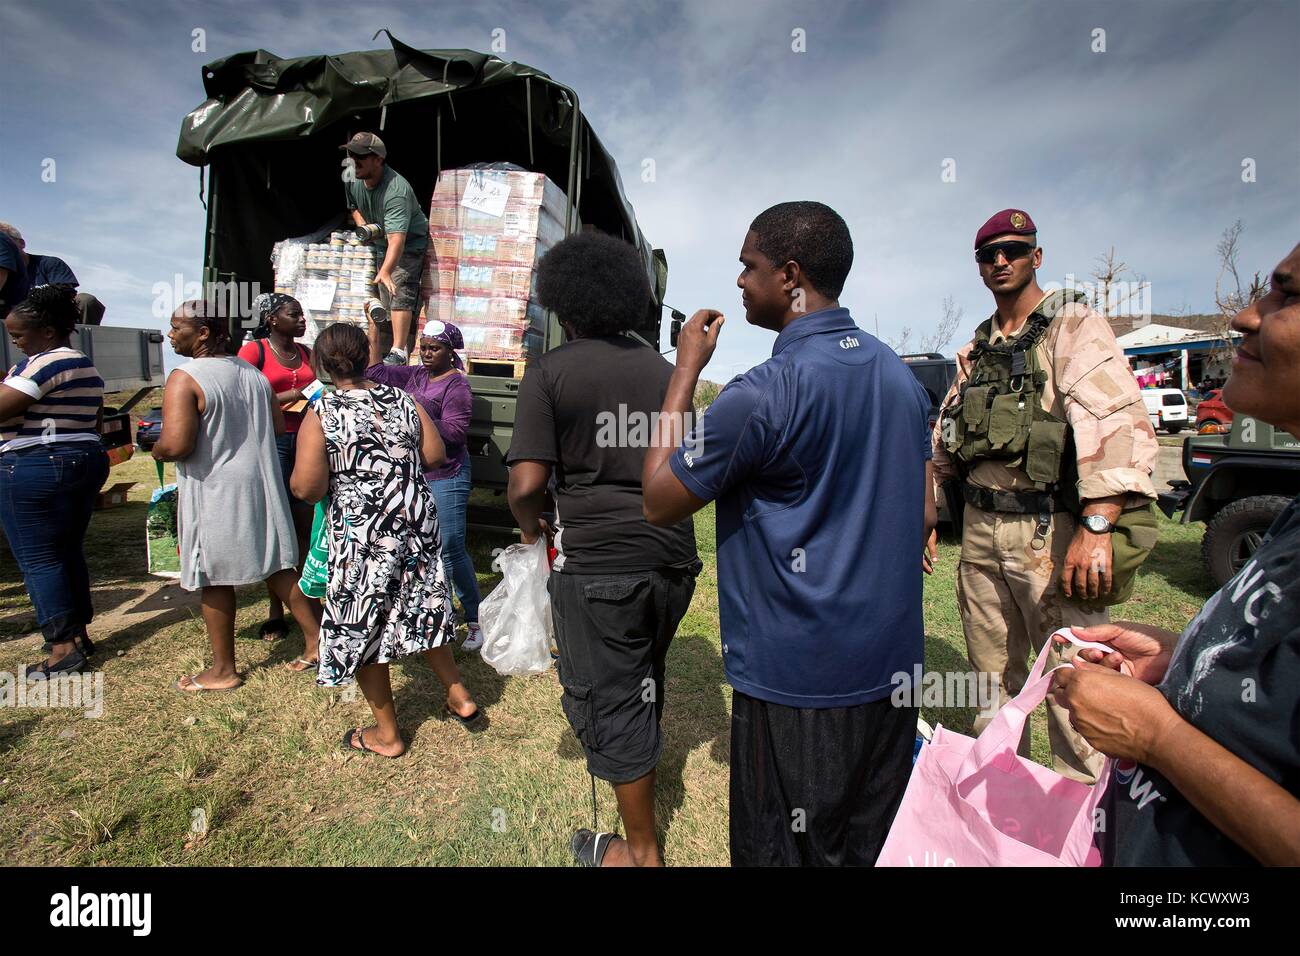 Royal Dutch Marines guard food aid at a humanitarian relief distribution point in the aftermath of Hurricane Irma that devastated much of the island September 14, 2017 in Philipsburg, St. Maarten. Stock Photo